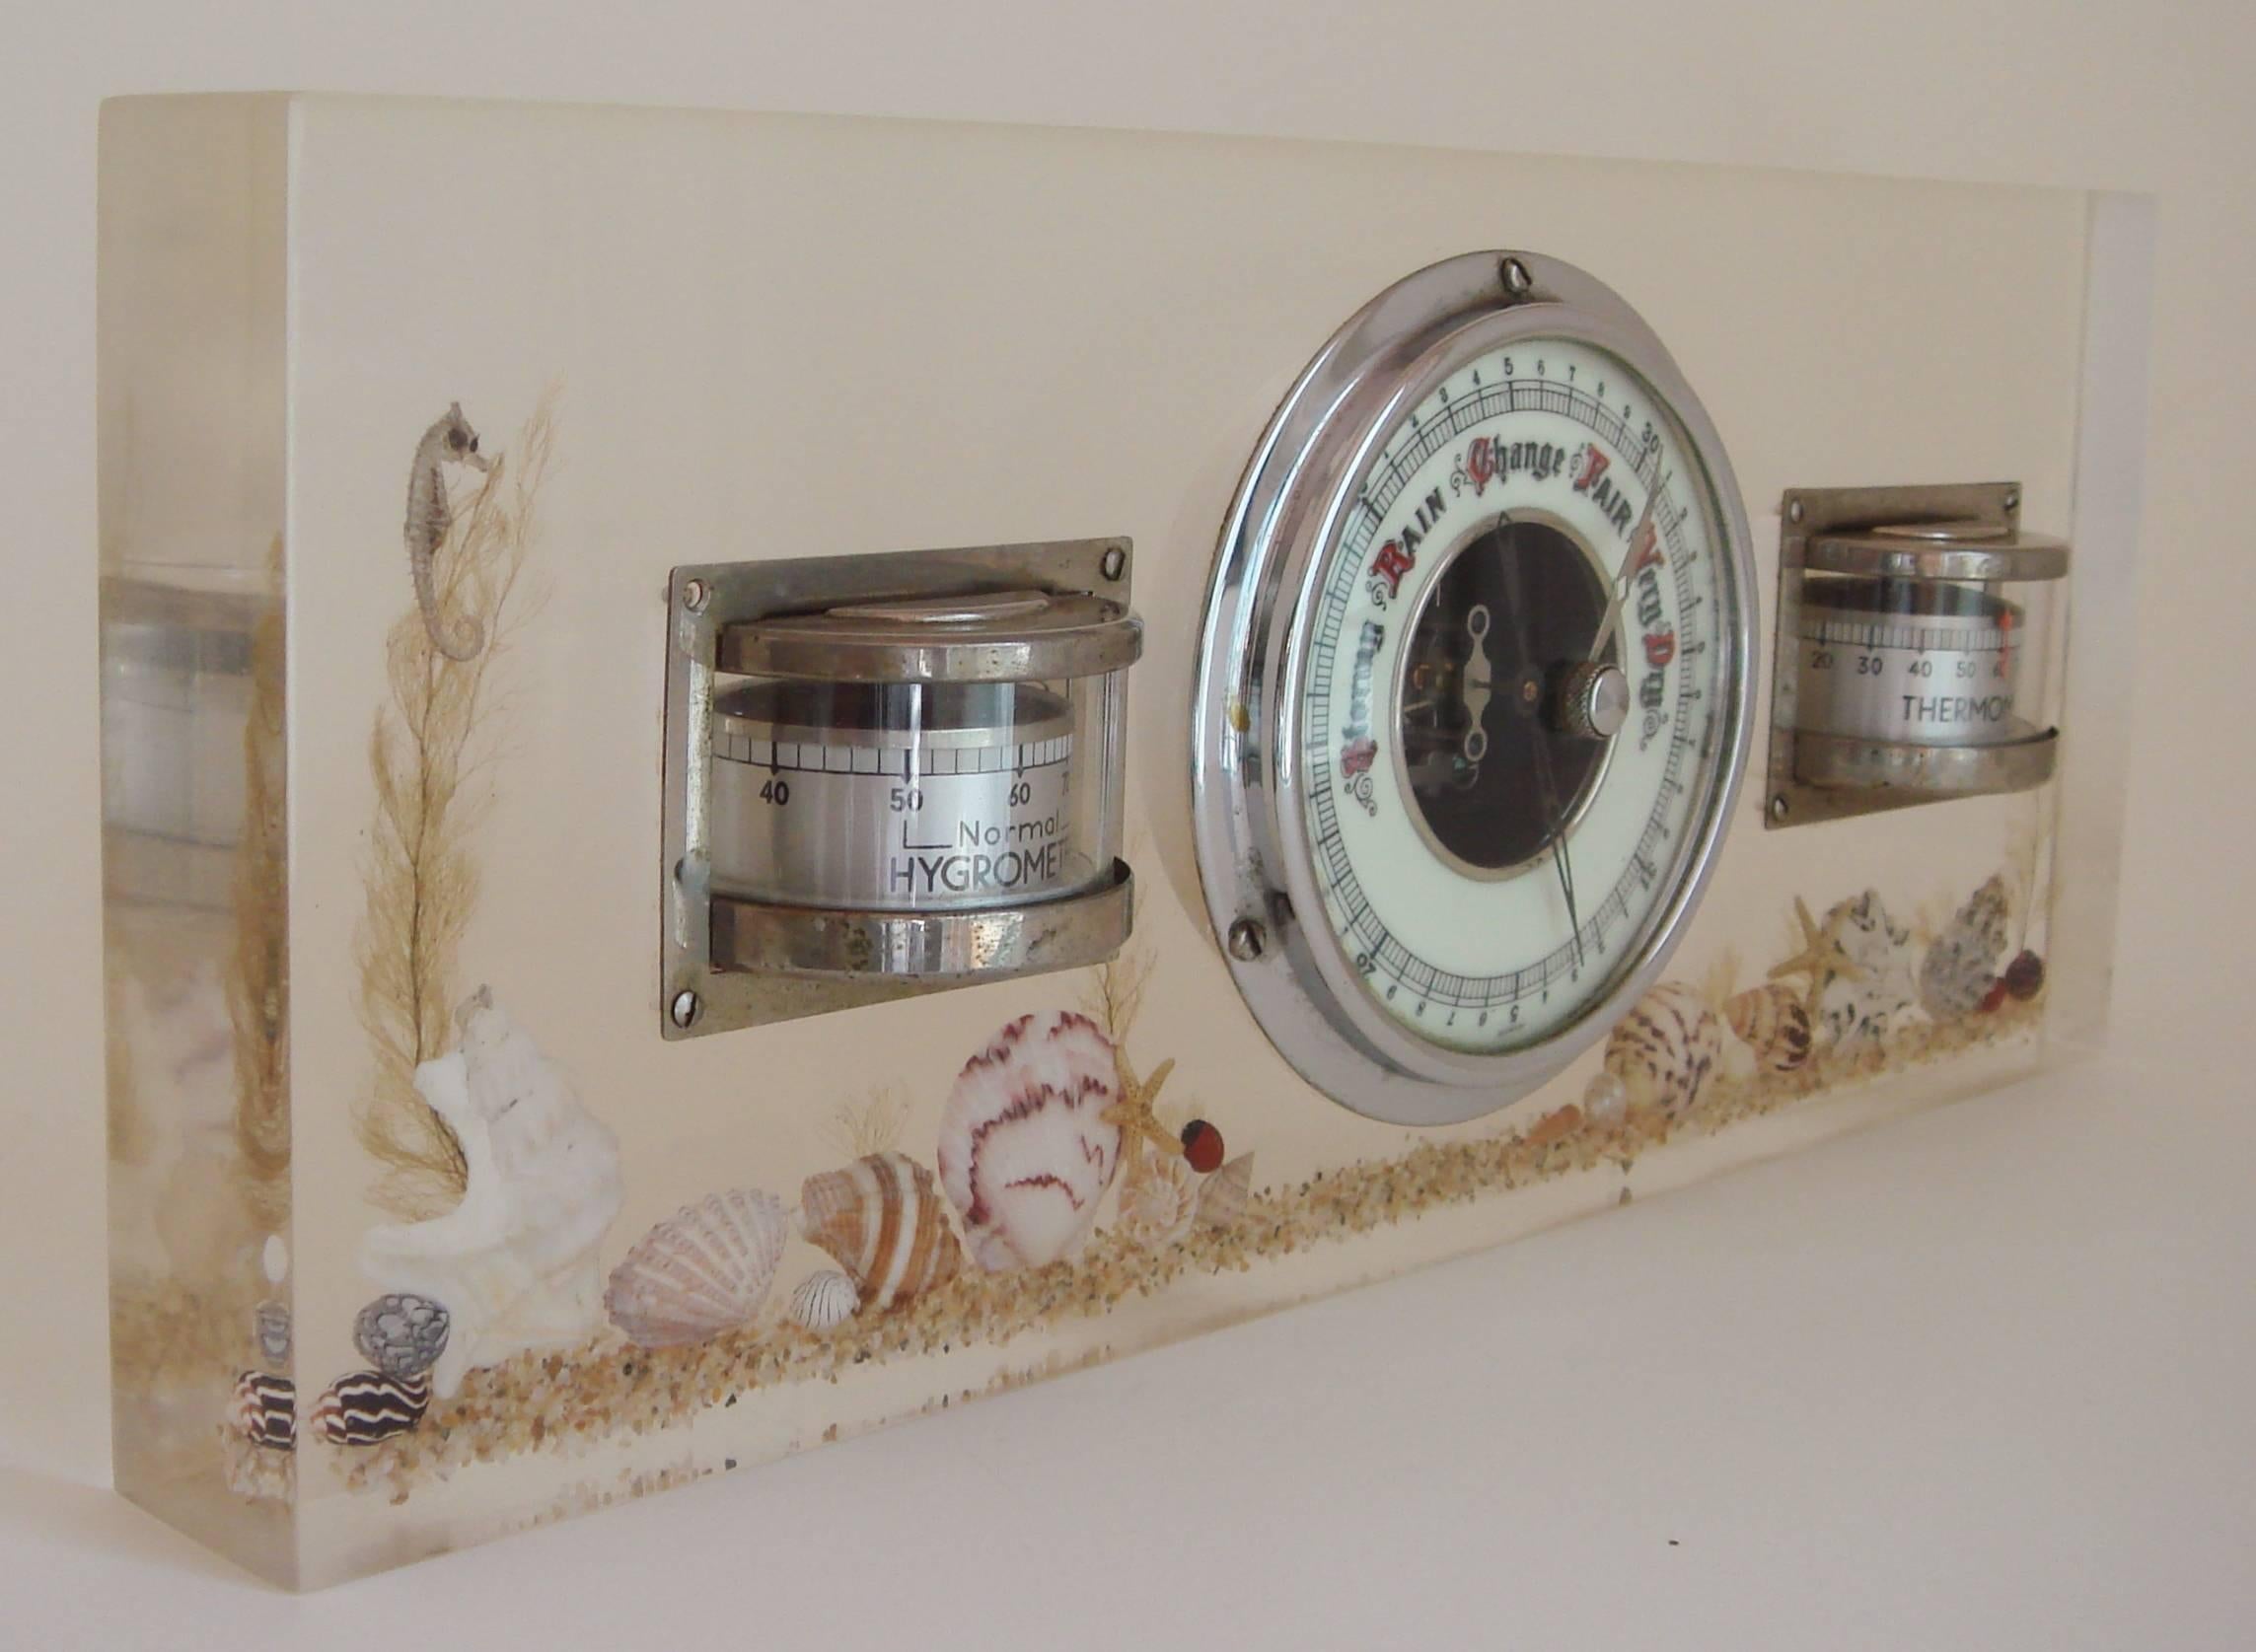 This stylish German Art Deco desktop weather station features a chrome-plated thermometer, hygrometer and barometer set into a block of Lucite. Encapsulated in this block is a miniature seabed of actual sand with assorted shells, seaweed, seahorses